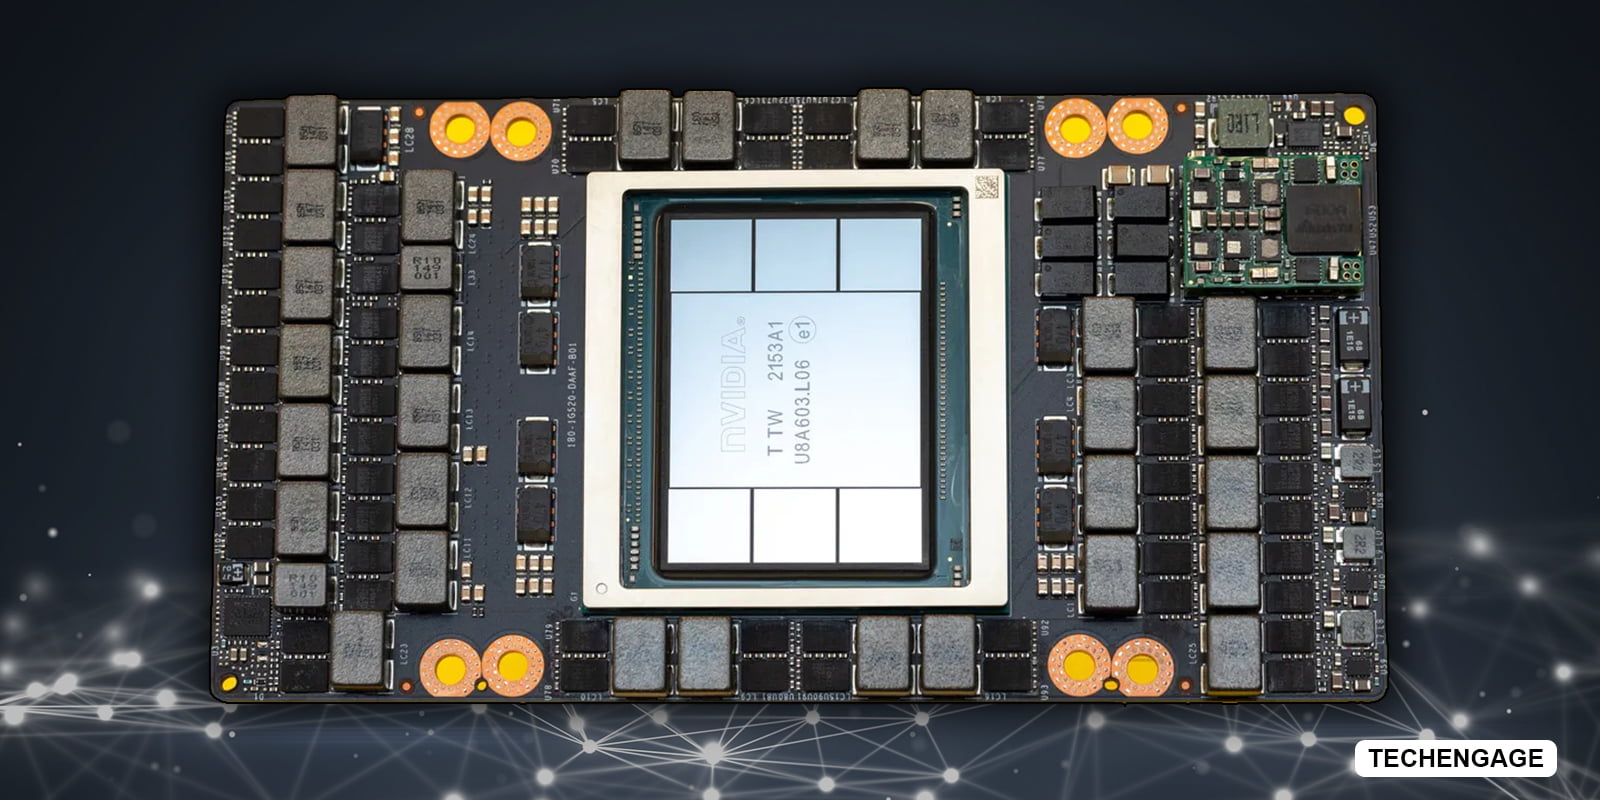 Nvidia’s H100 “Hopper” Chip Aims To Help Ai Speed Up Digitization